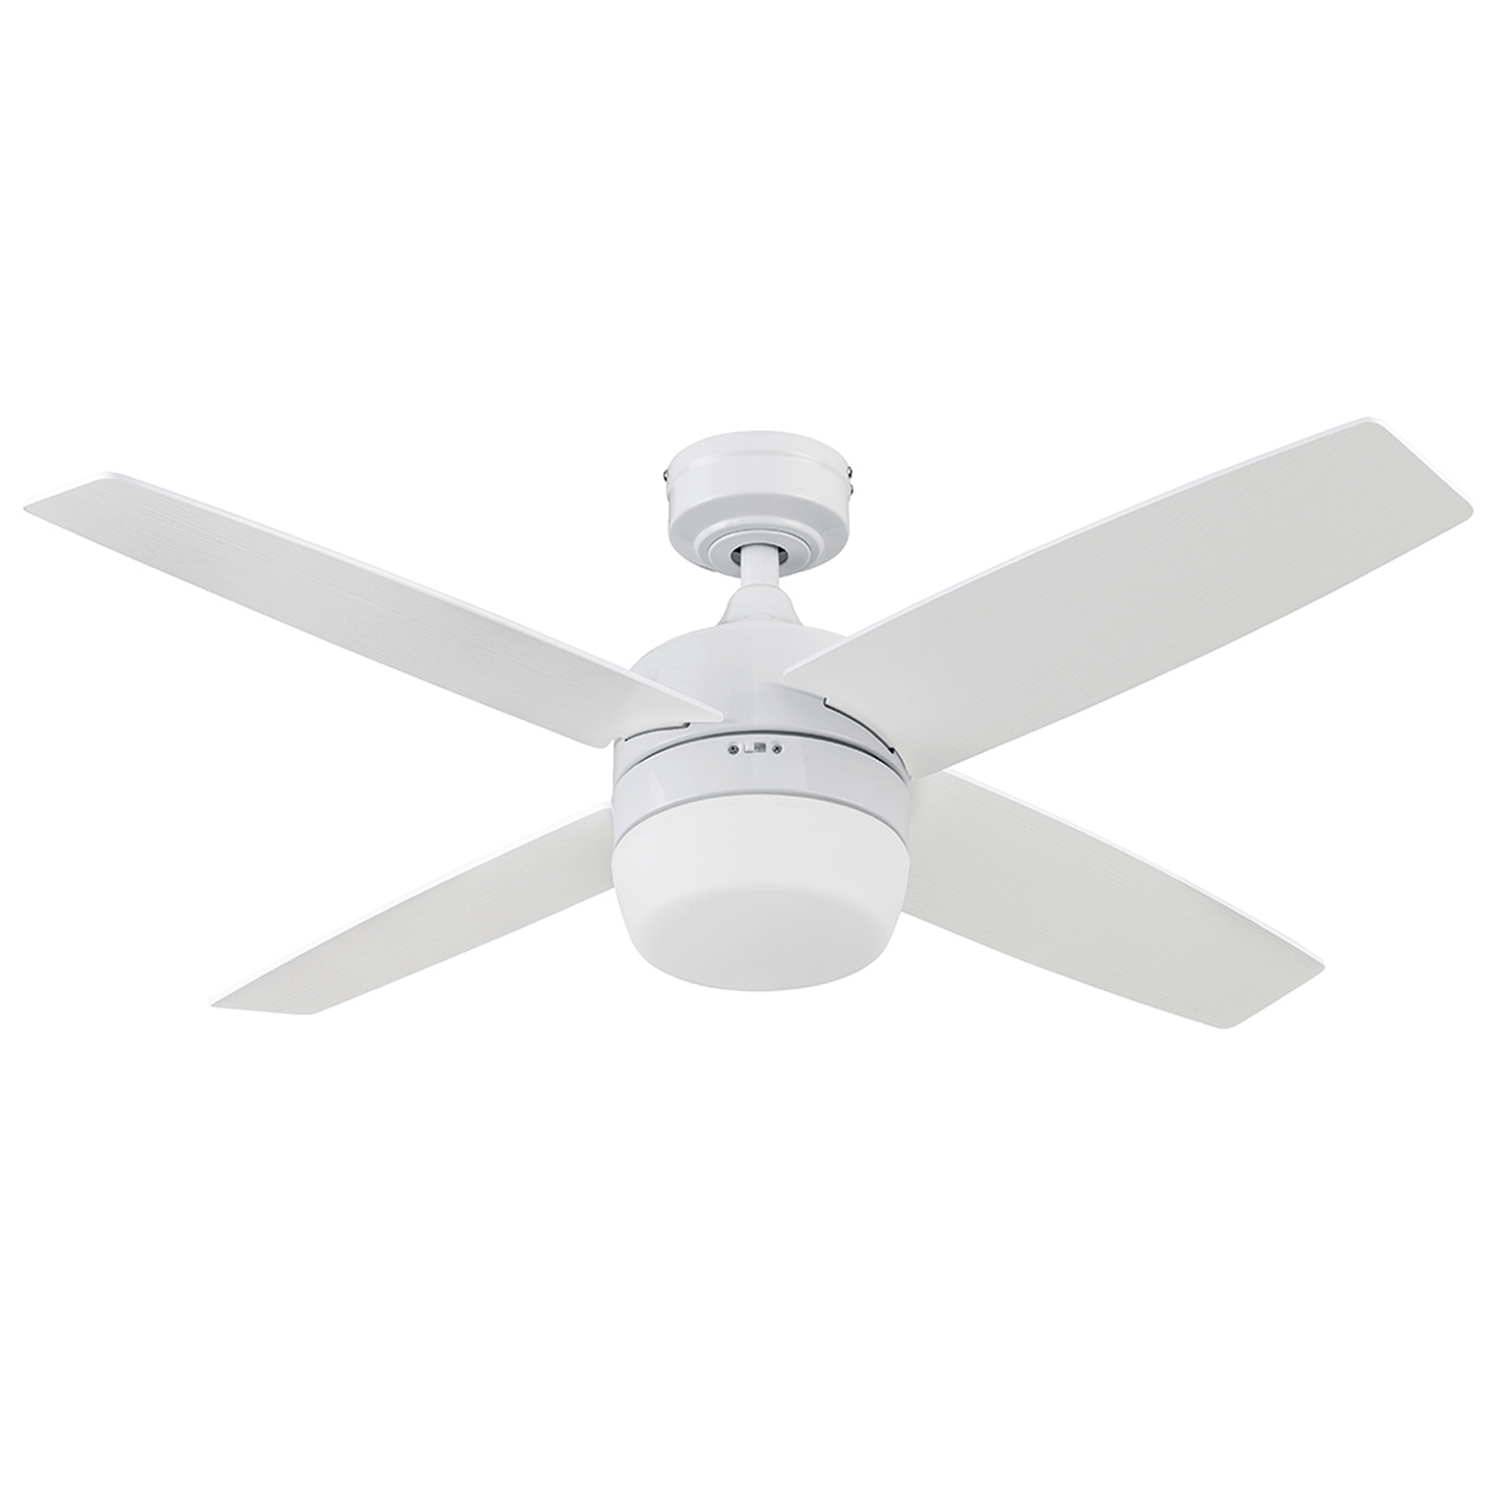 44 Inch Atlas, Bright White, Remote Control, Ceiling Fan by Prominence Home